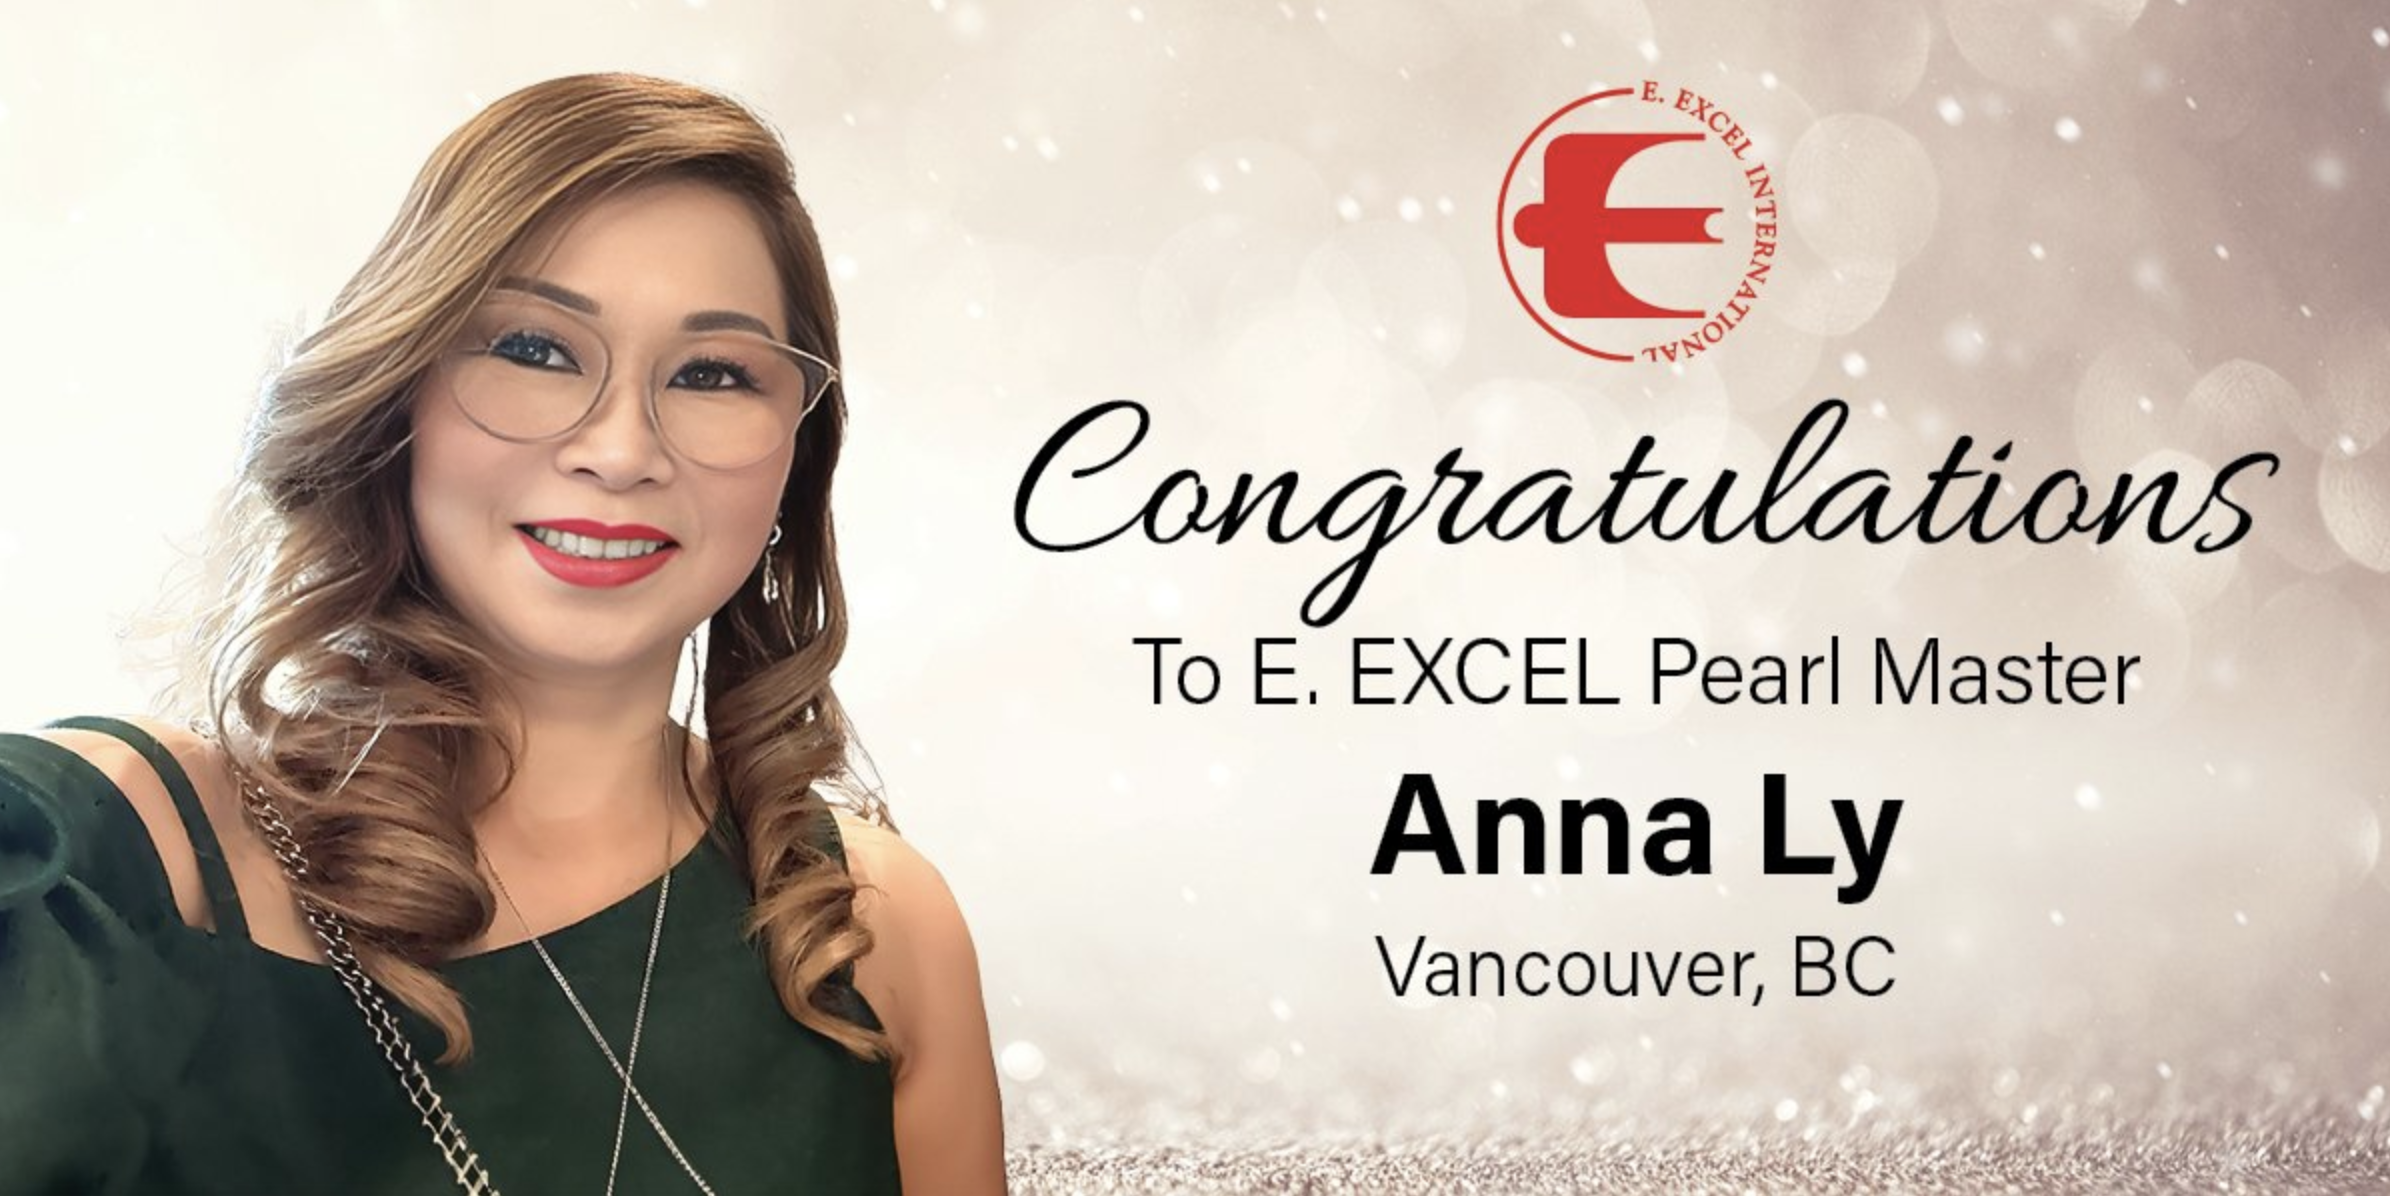 E. EXCEL Pearl Master Anna Ly